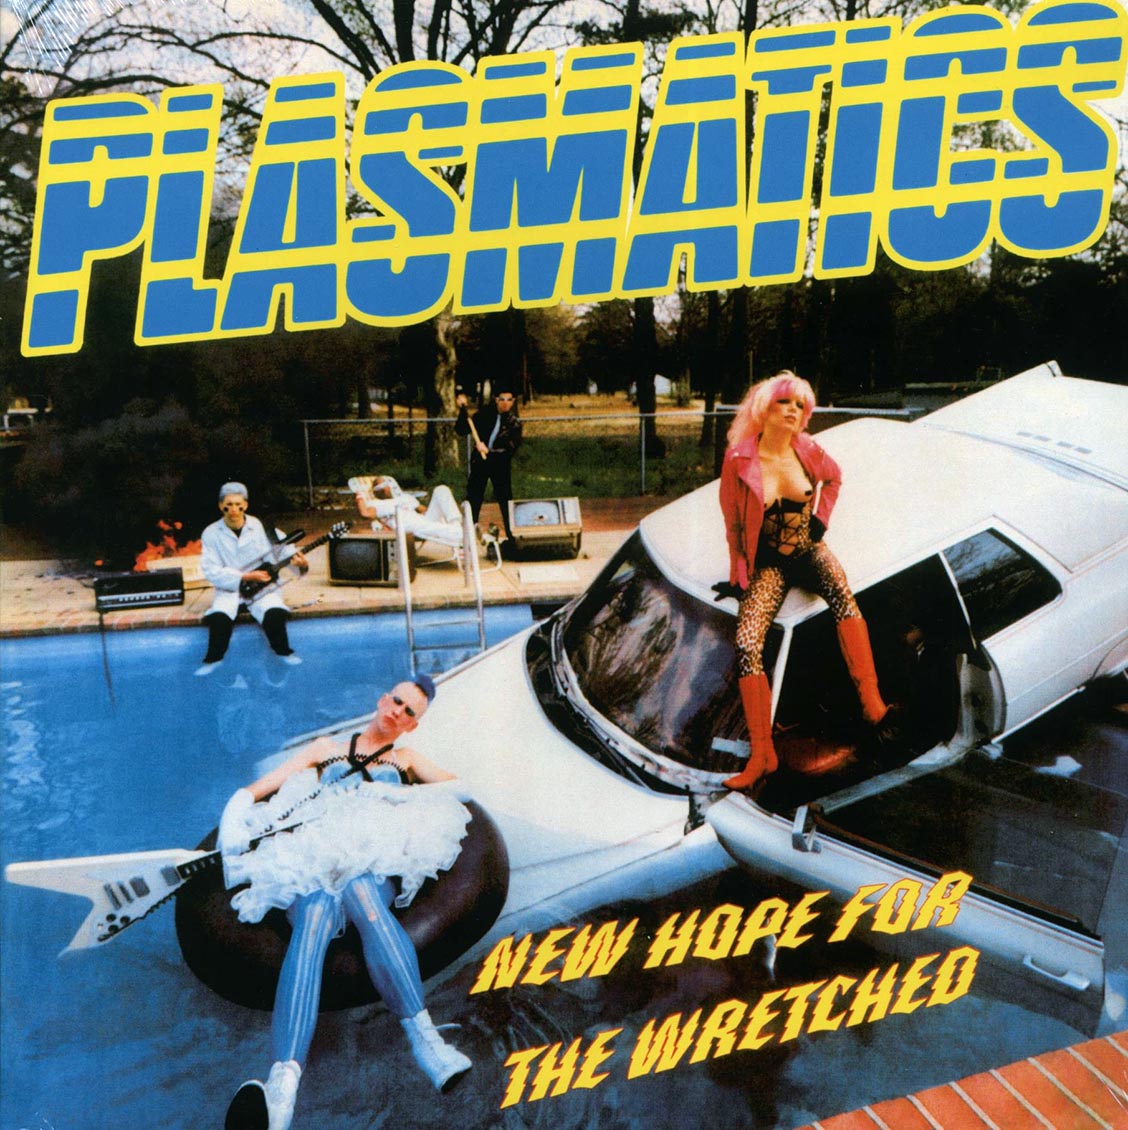 Plasmatics "New Hope For The Wretched" LP